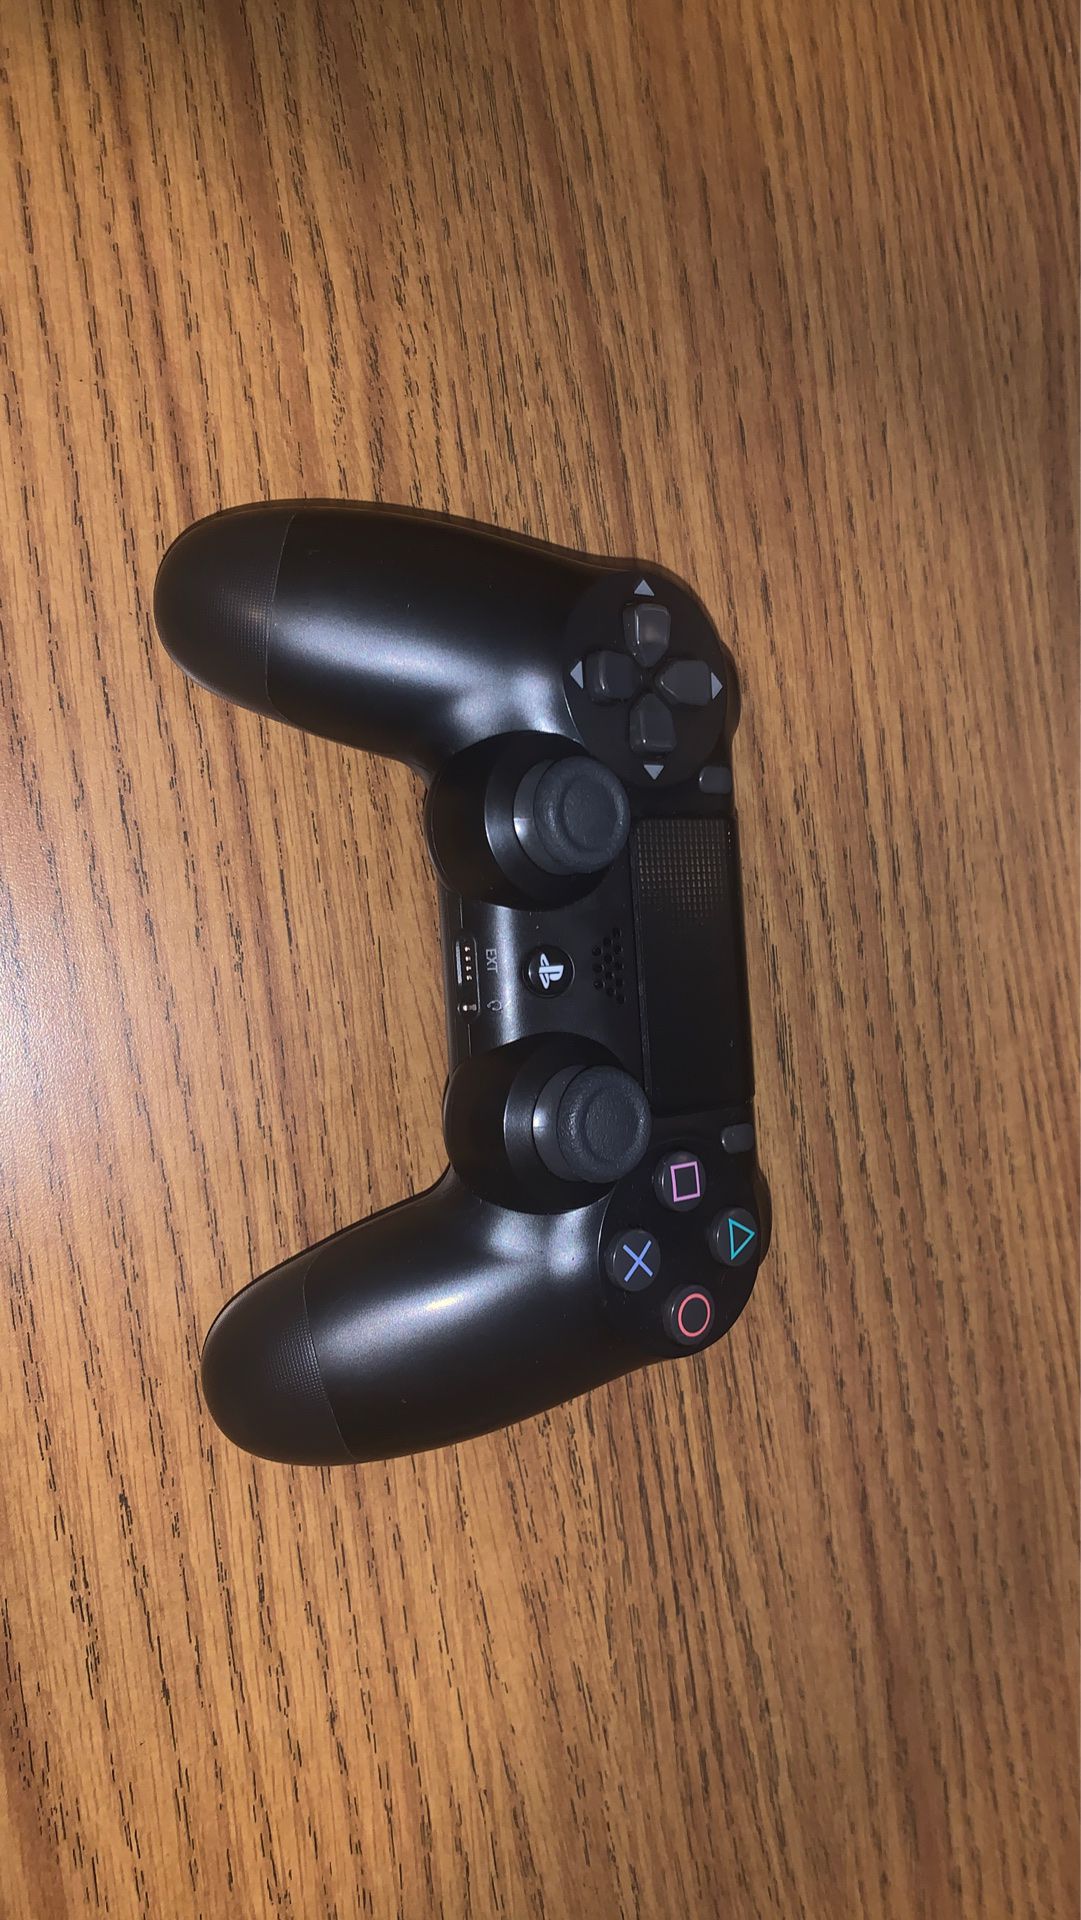 playstation 4 controller